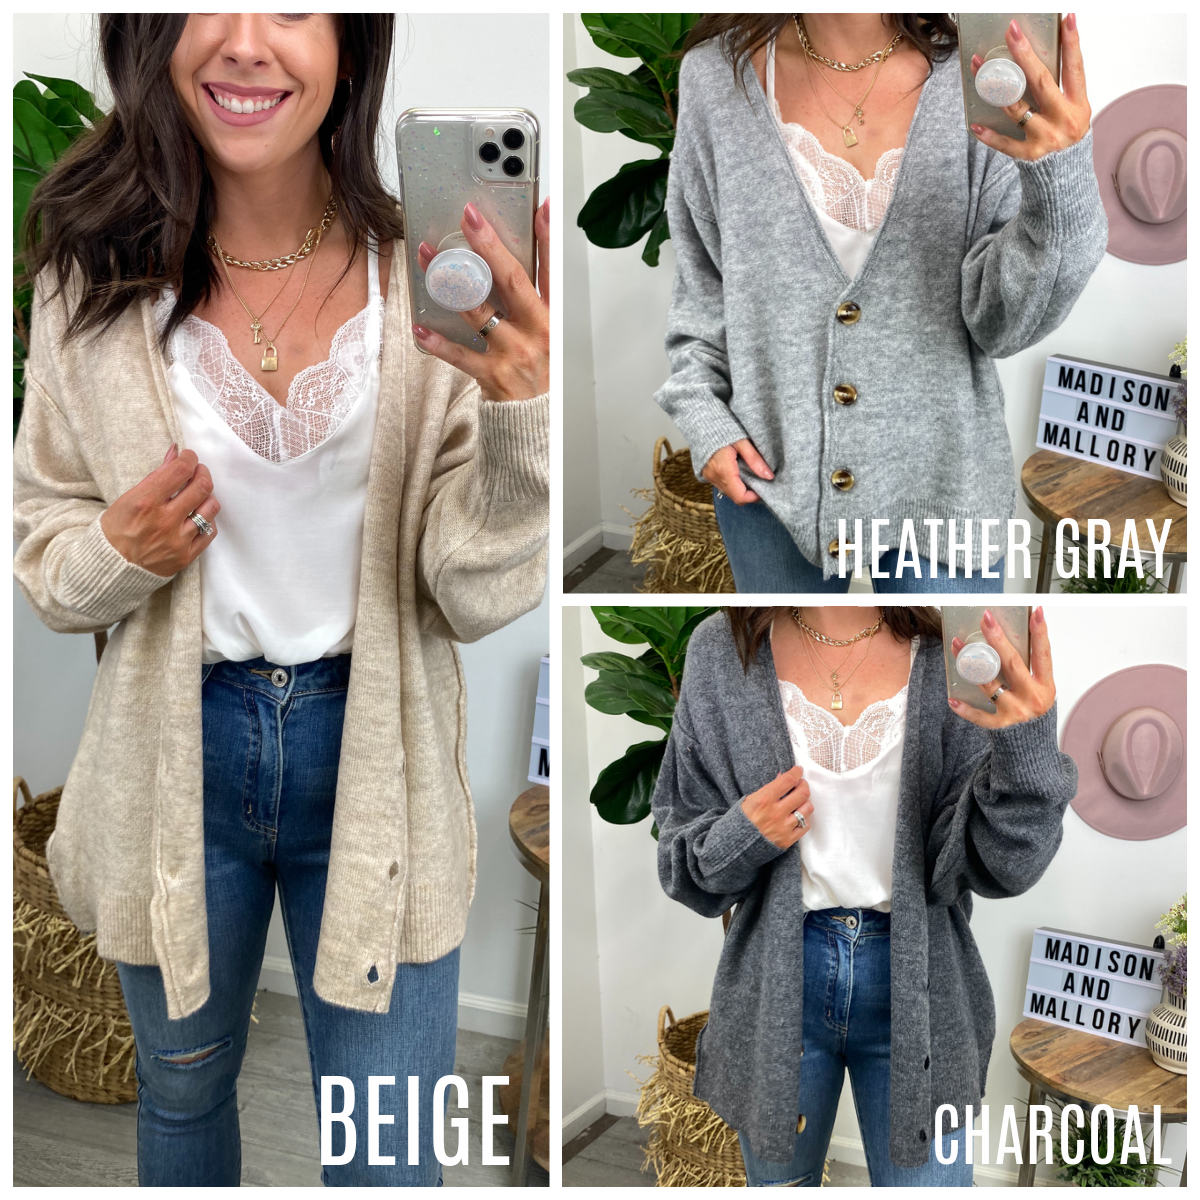  Keep Me Company Button Relaxed Fit Cardigan - FINAL SALE - Madison and Mallory